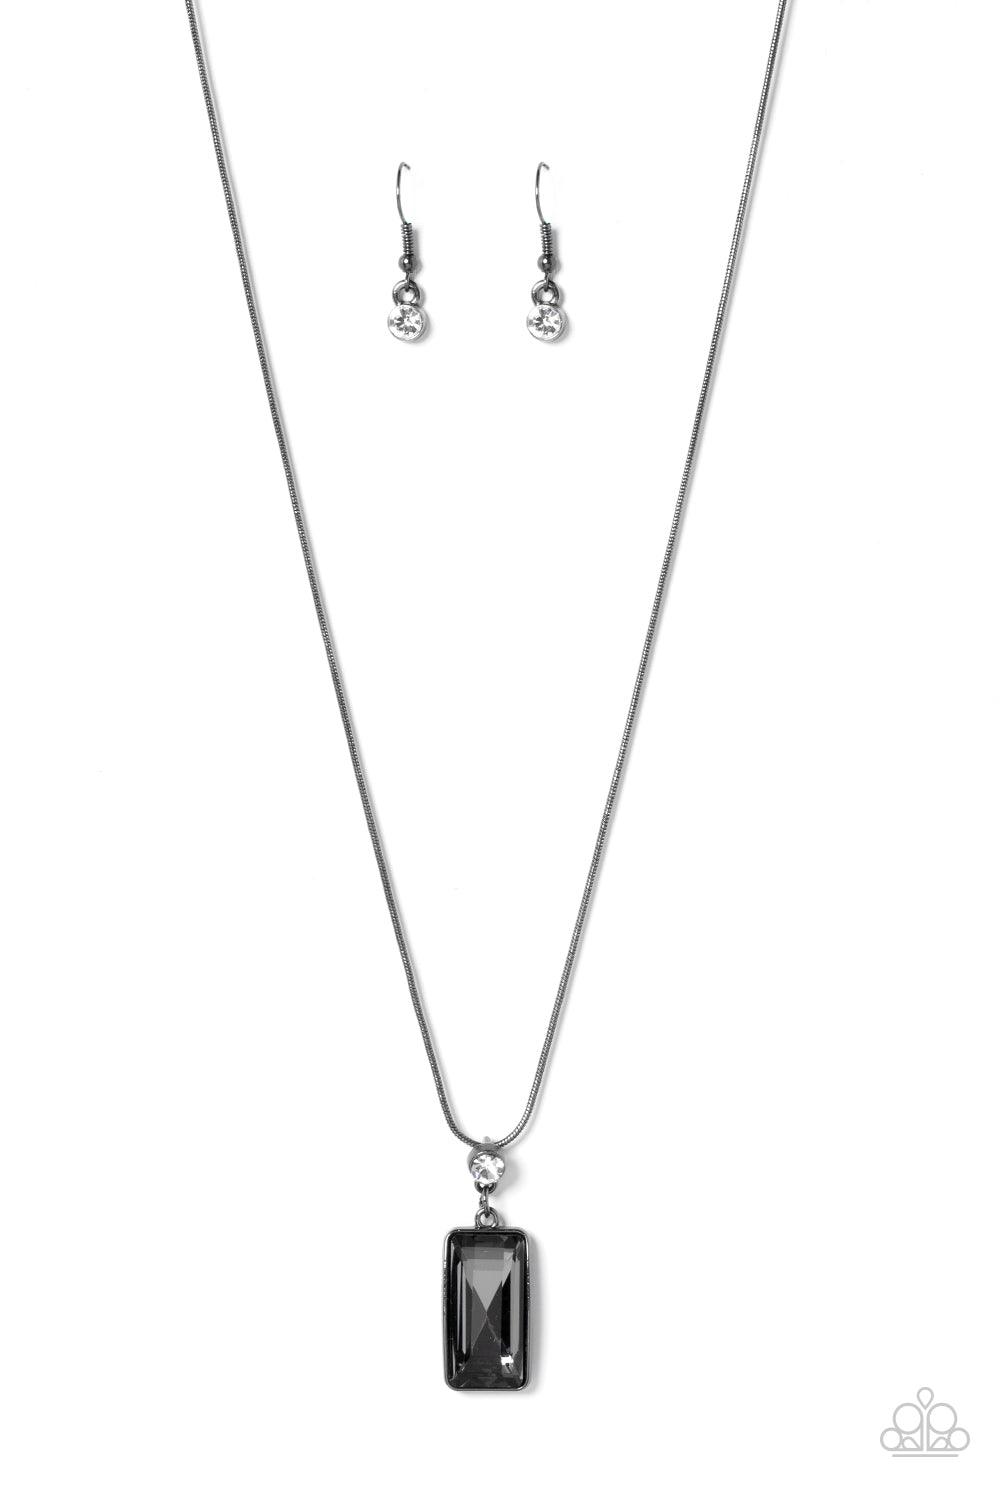 Never SLAY Never - Black Necklace | Paparazzi Accessories | $5.00